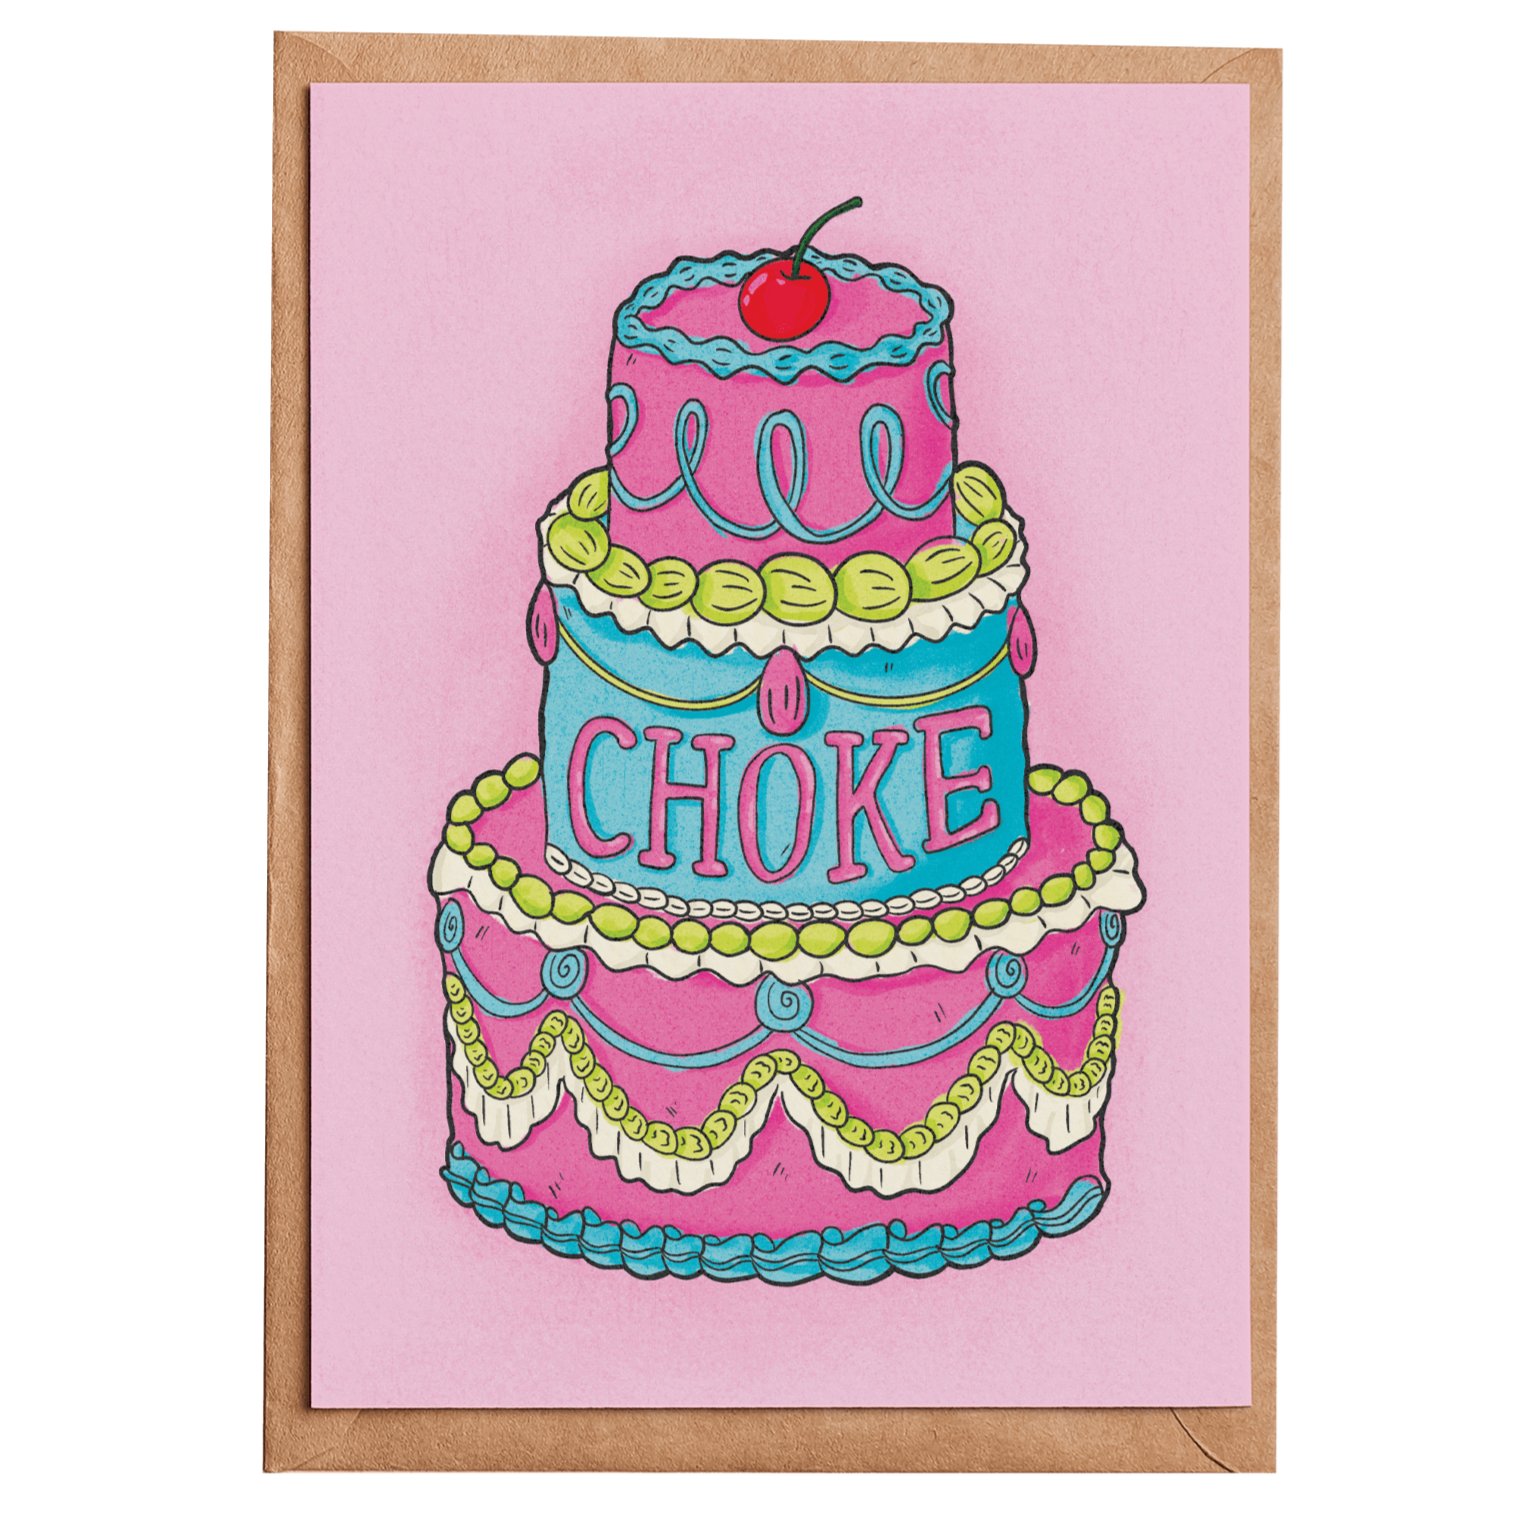 A pink card with a 3 tiered cake that says choke on it for a frenemy or gag gift 